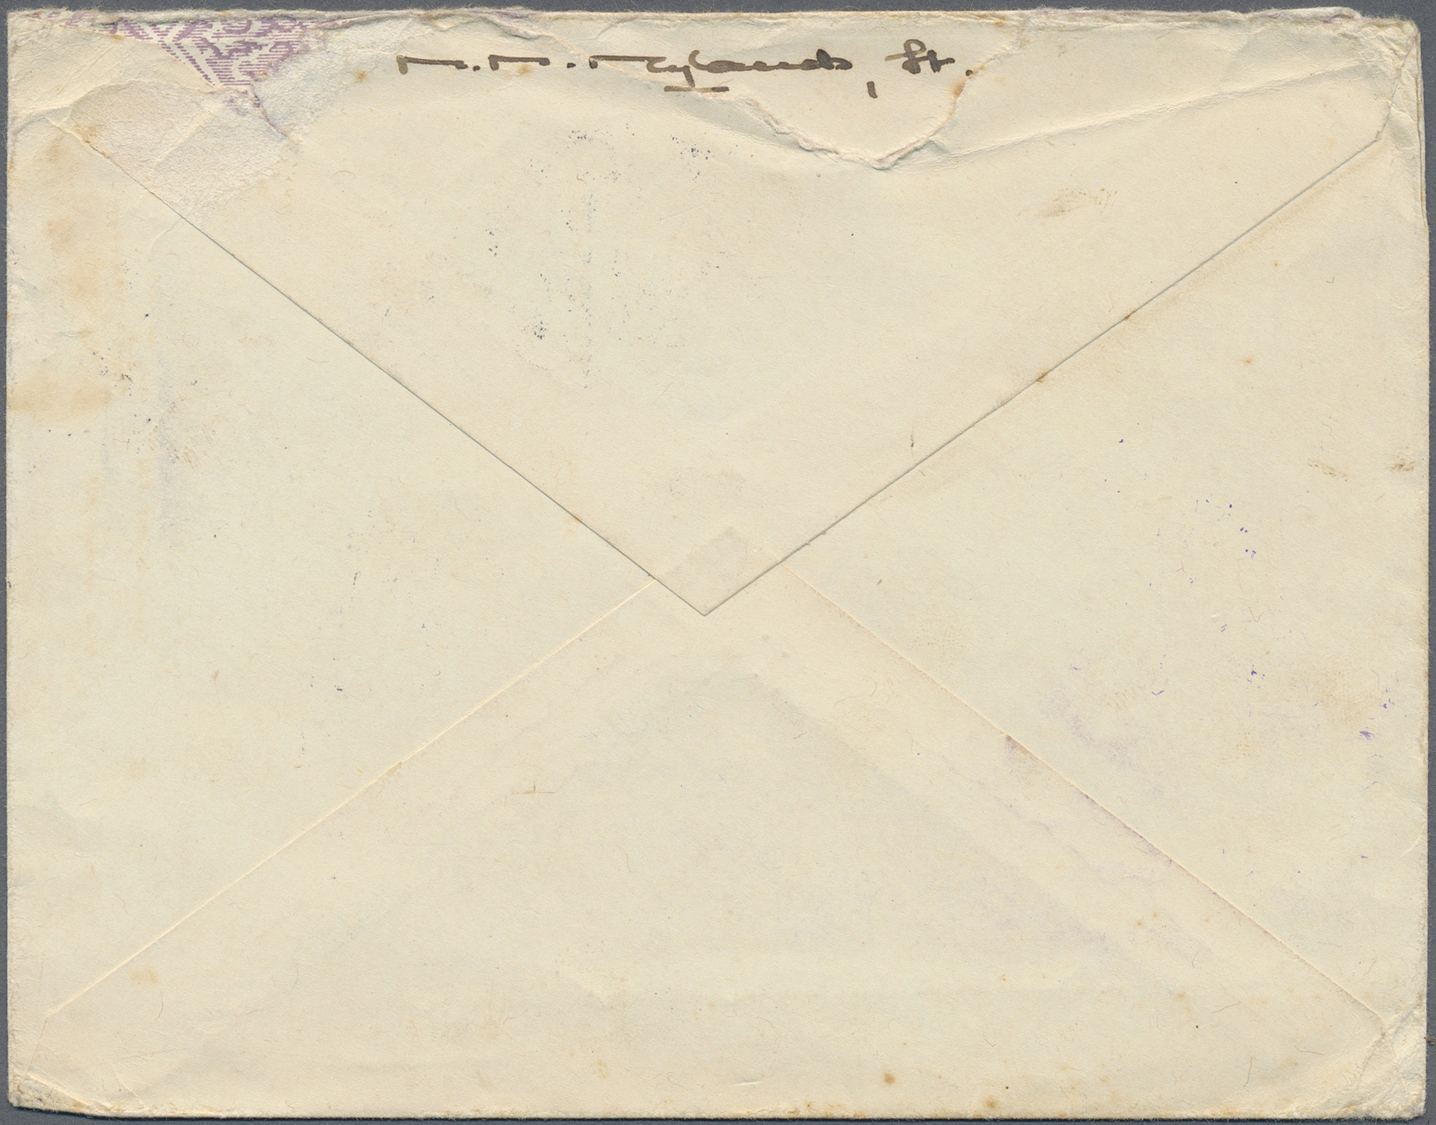 Br Curacao: 1941. Roughly Opend Air Mail Envelope Addressed To England Bearing Yvert 121, 5c Orange (strip Of Three) Tie - Curacao, Netherlands Antilles, Aruba